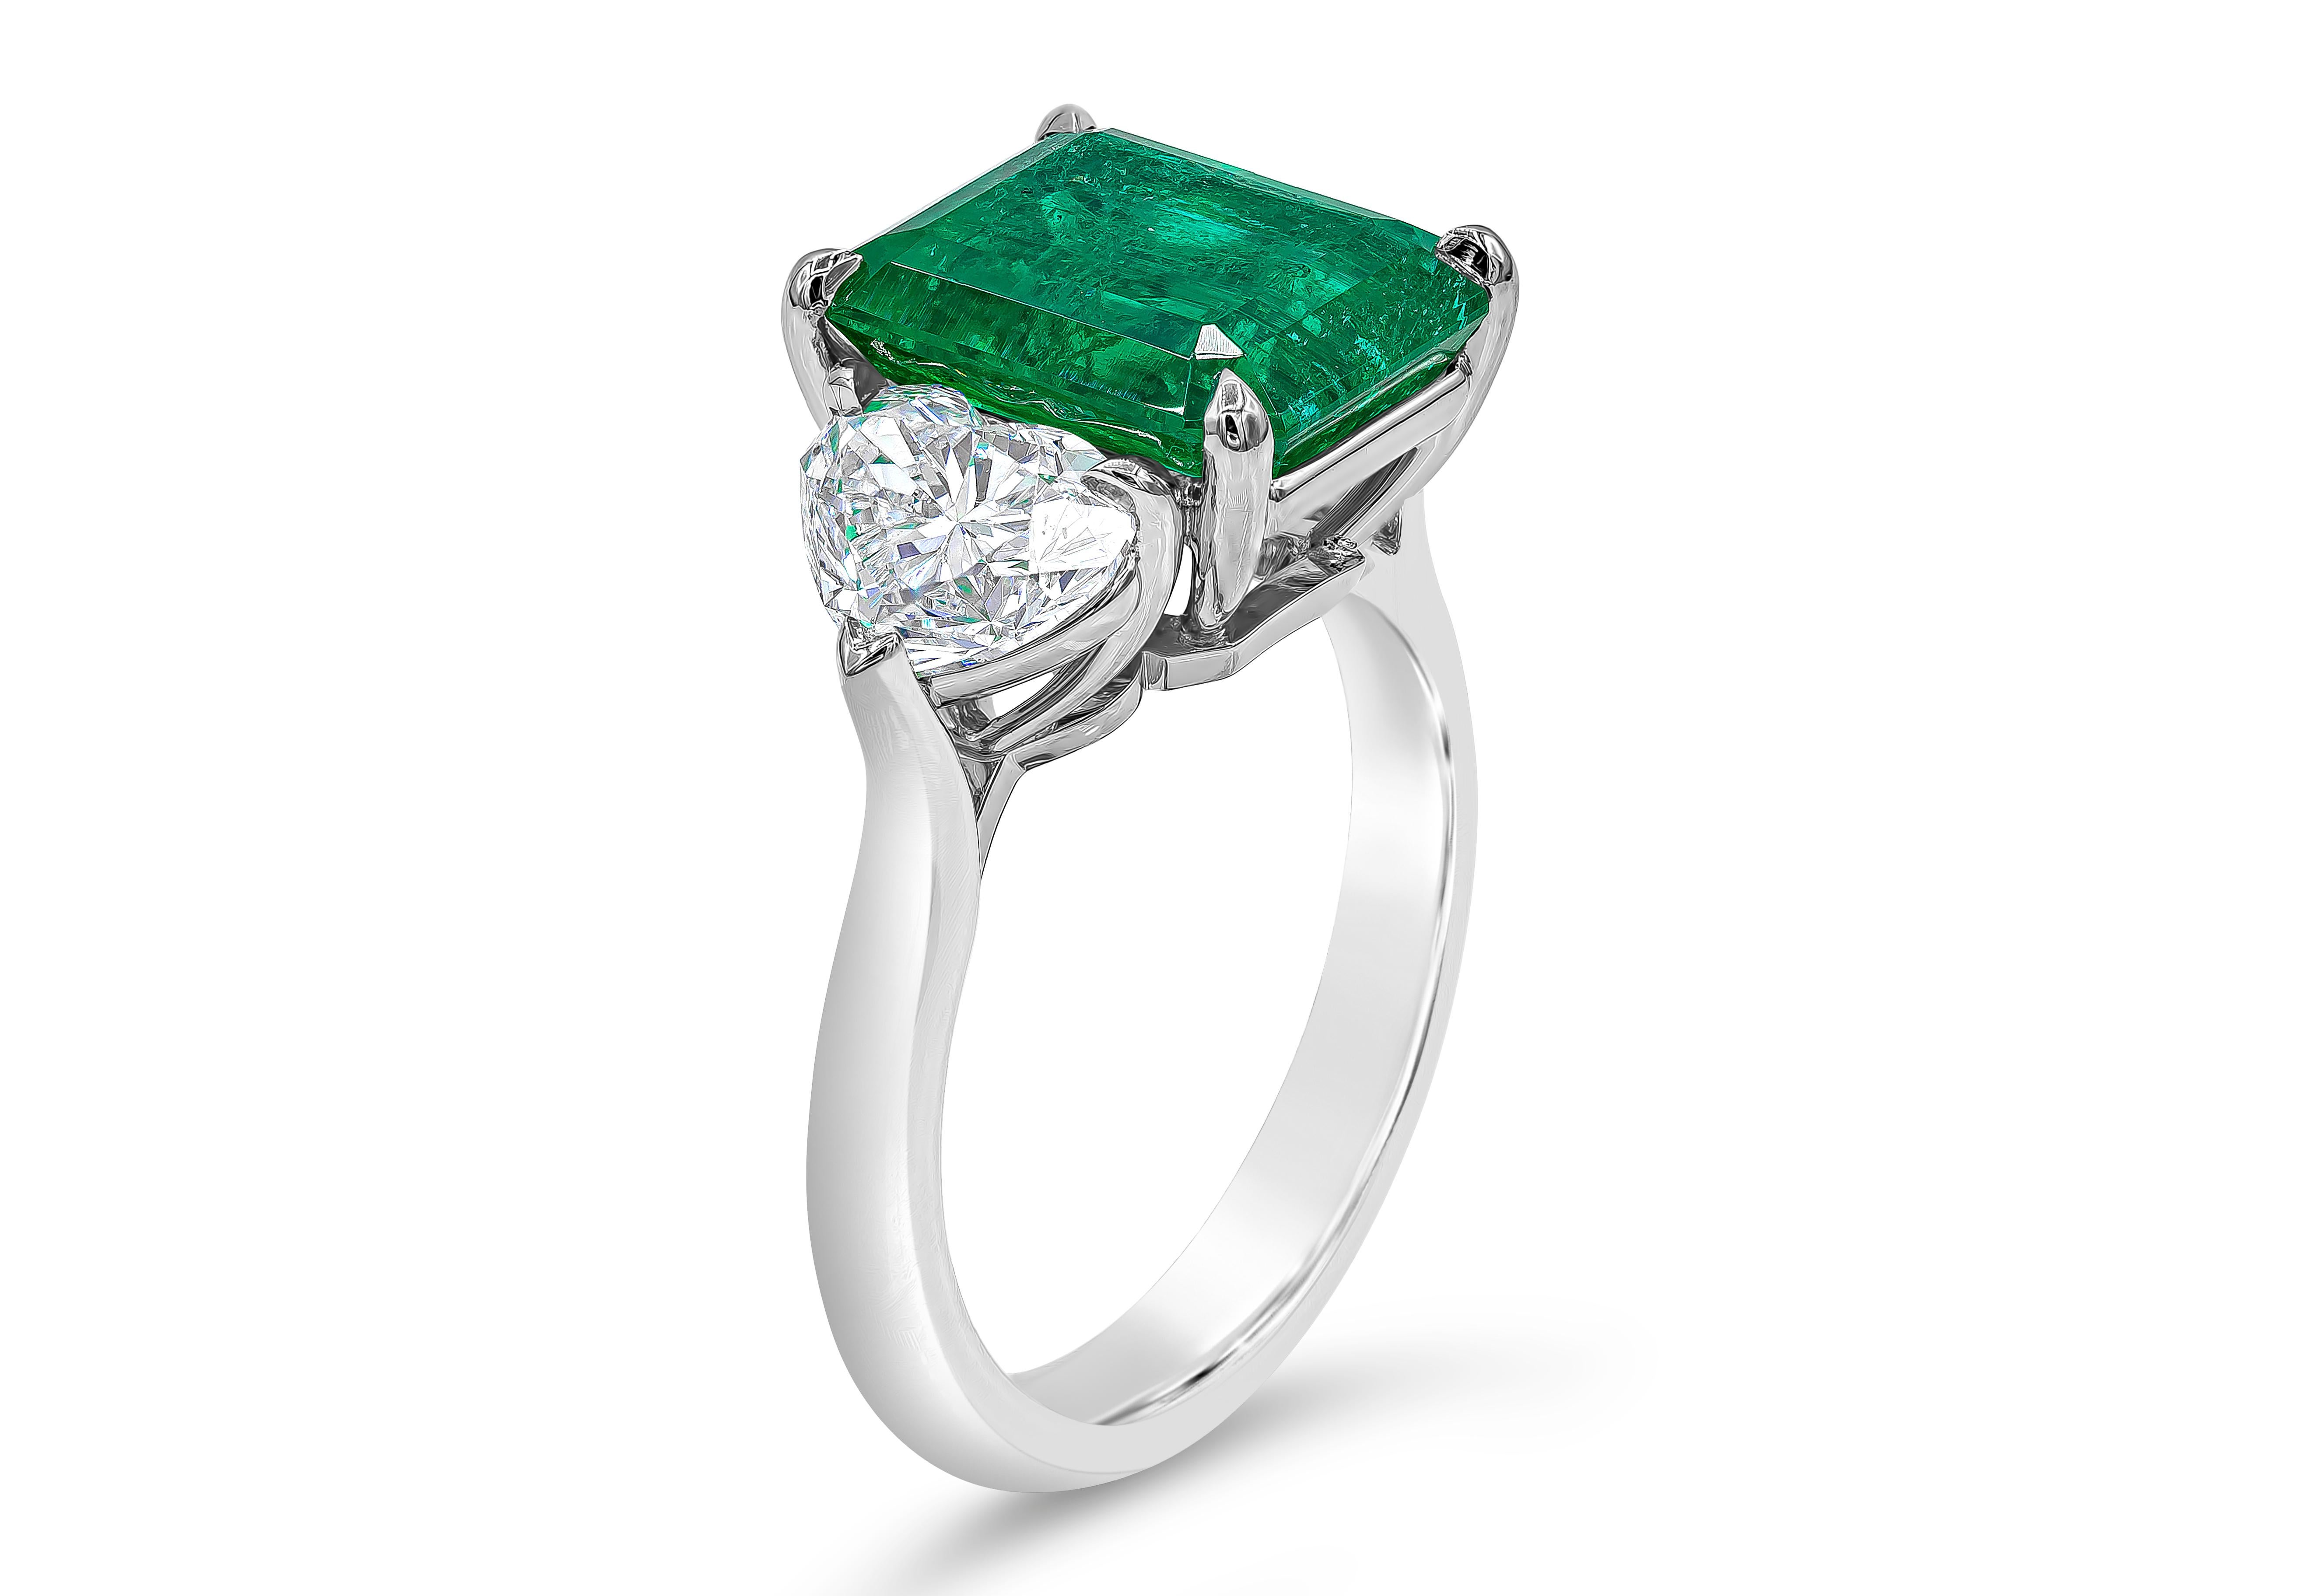 This vibrant and luxurious three-stone engagement ring showcasing 4.46 carats emerald cut color-rich green emerald, set in four prong basket setting. Flanked by two brilliant cut heart shape diamonds weighing 2.01 carats total, GIA certified as E-F